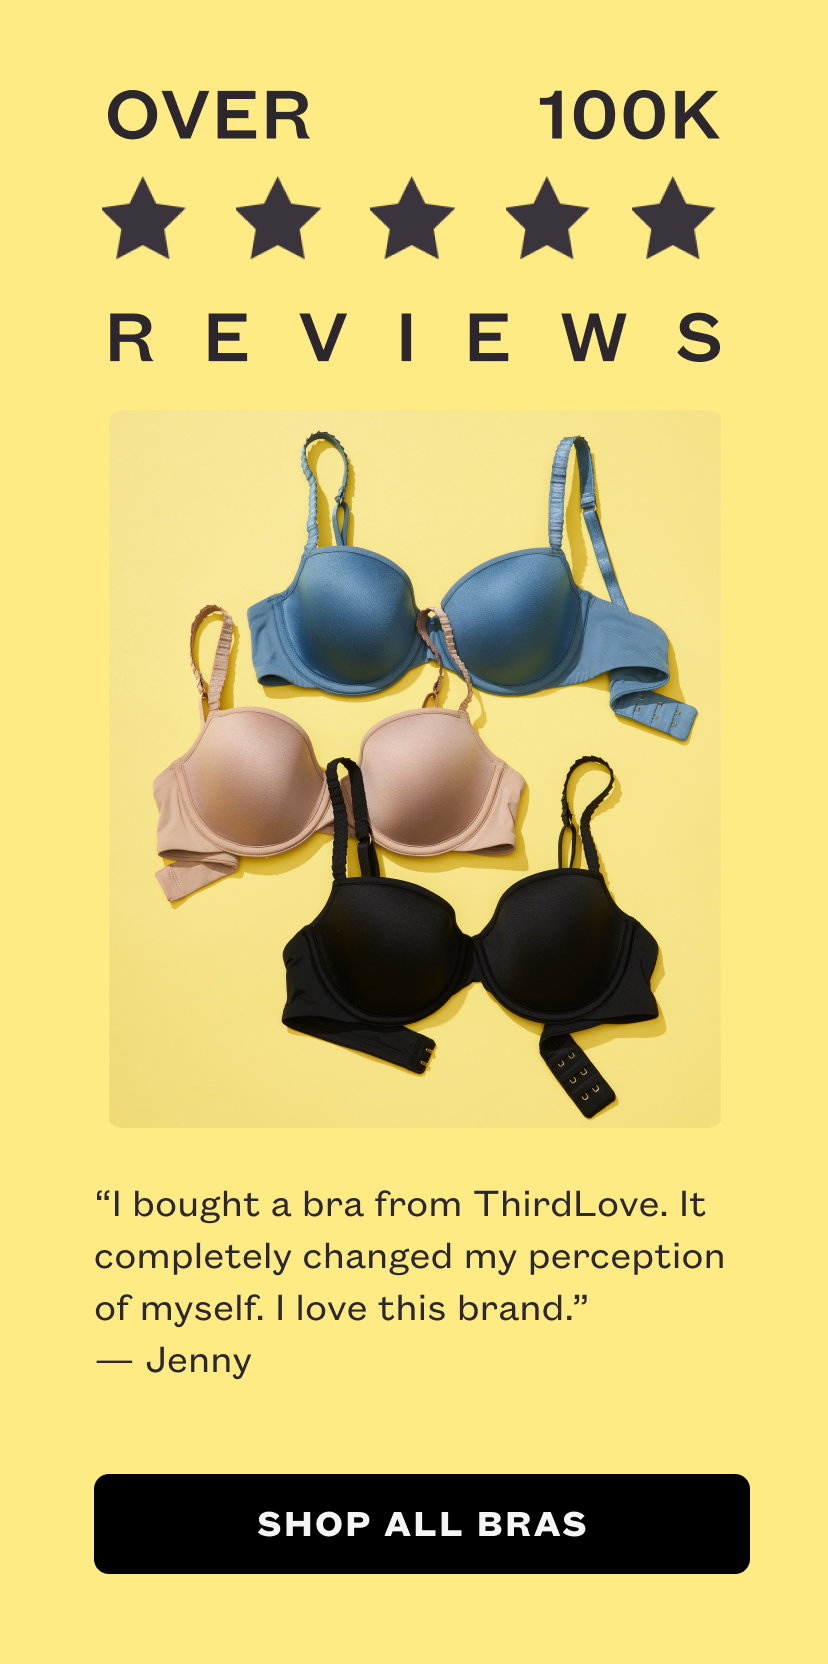 Third Love: Sports bras youll want to show off.